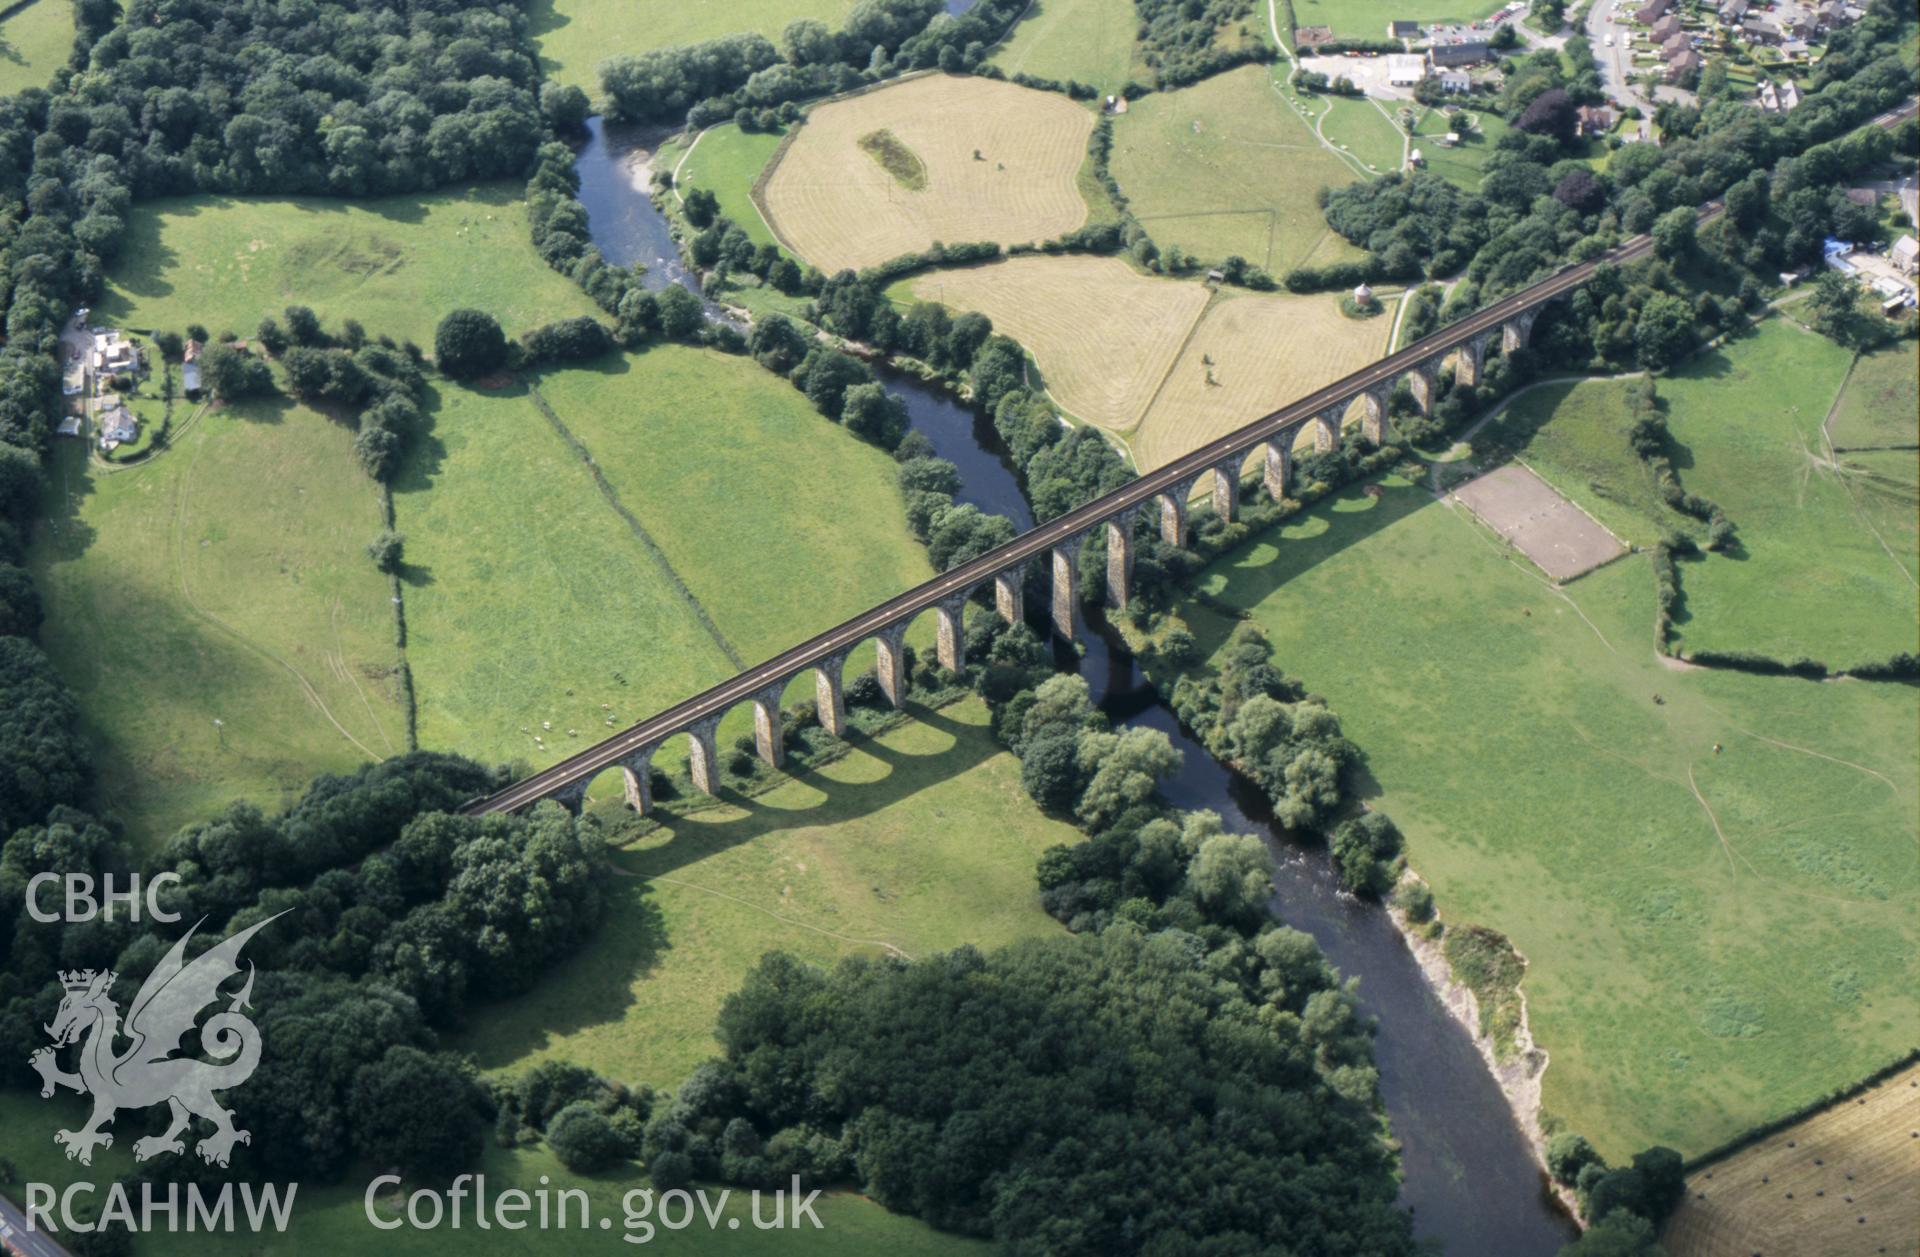 RCAHMW colour oblique aerial photograph of Cefn Bychan Viaduct taken on 30/07/2004 by Toby Driver